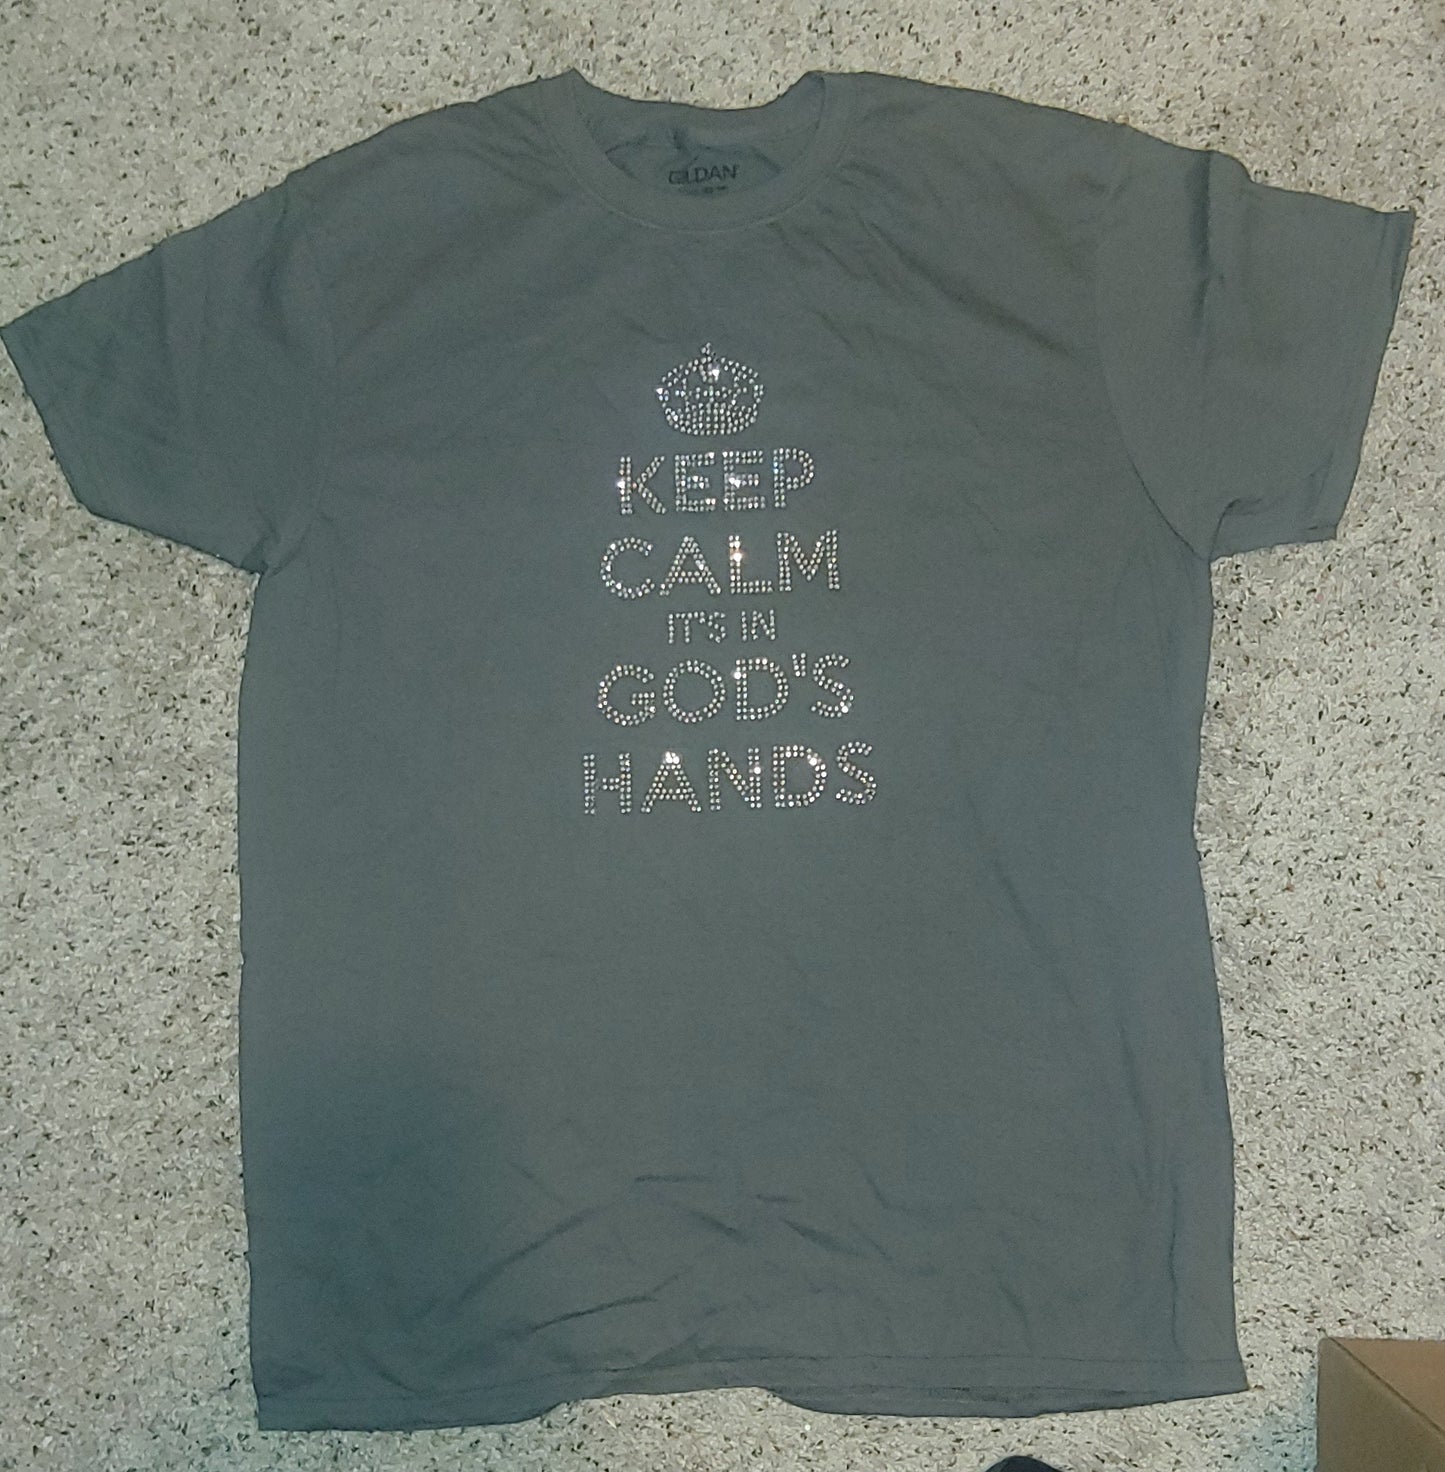 Keep Calm It's In God's Hands - Size Large